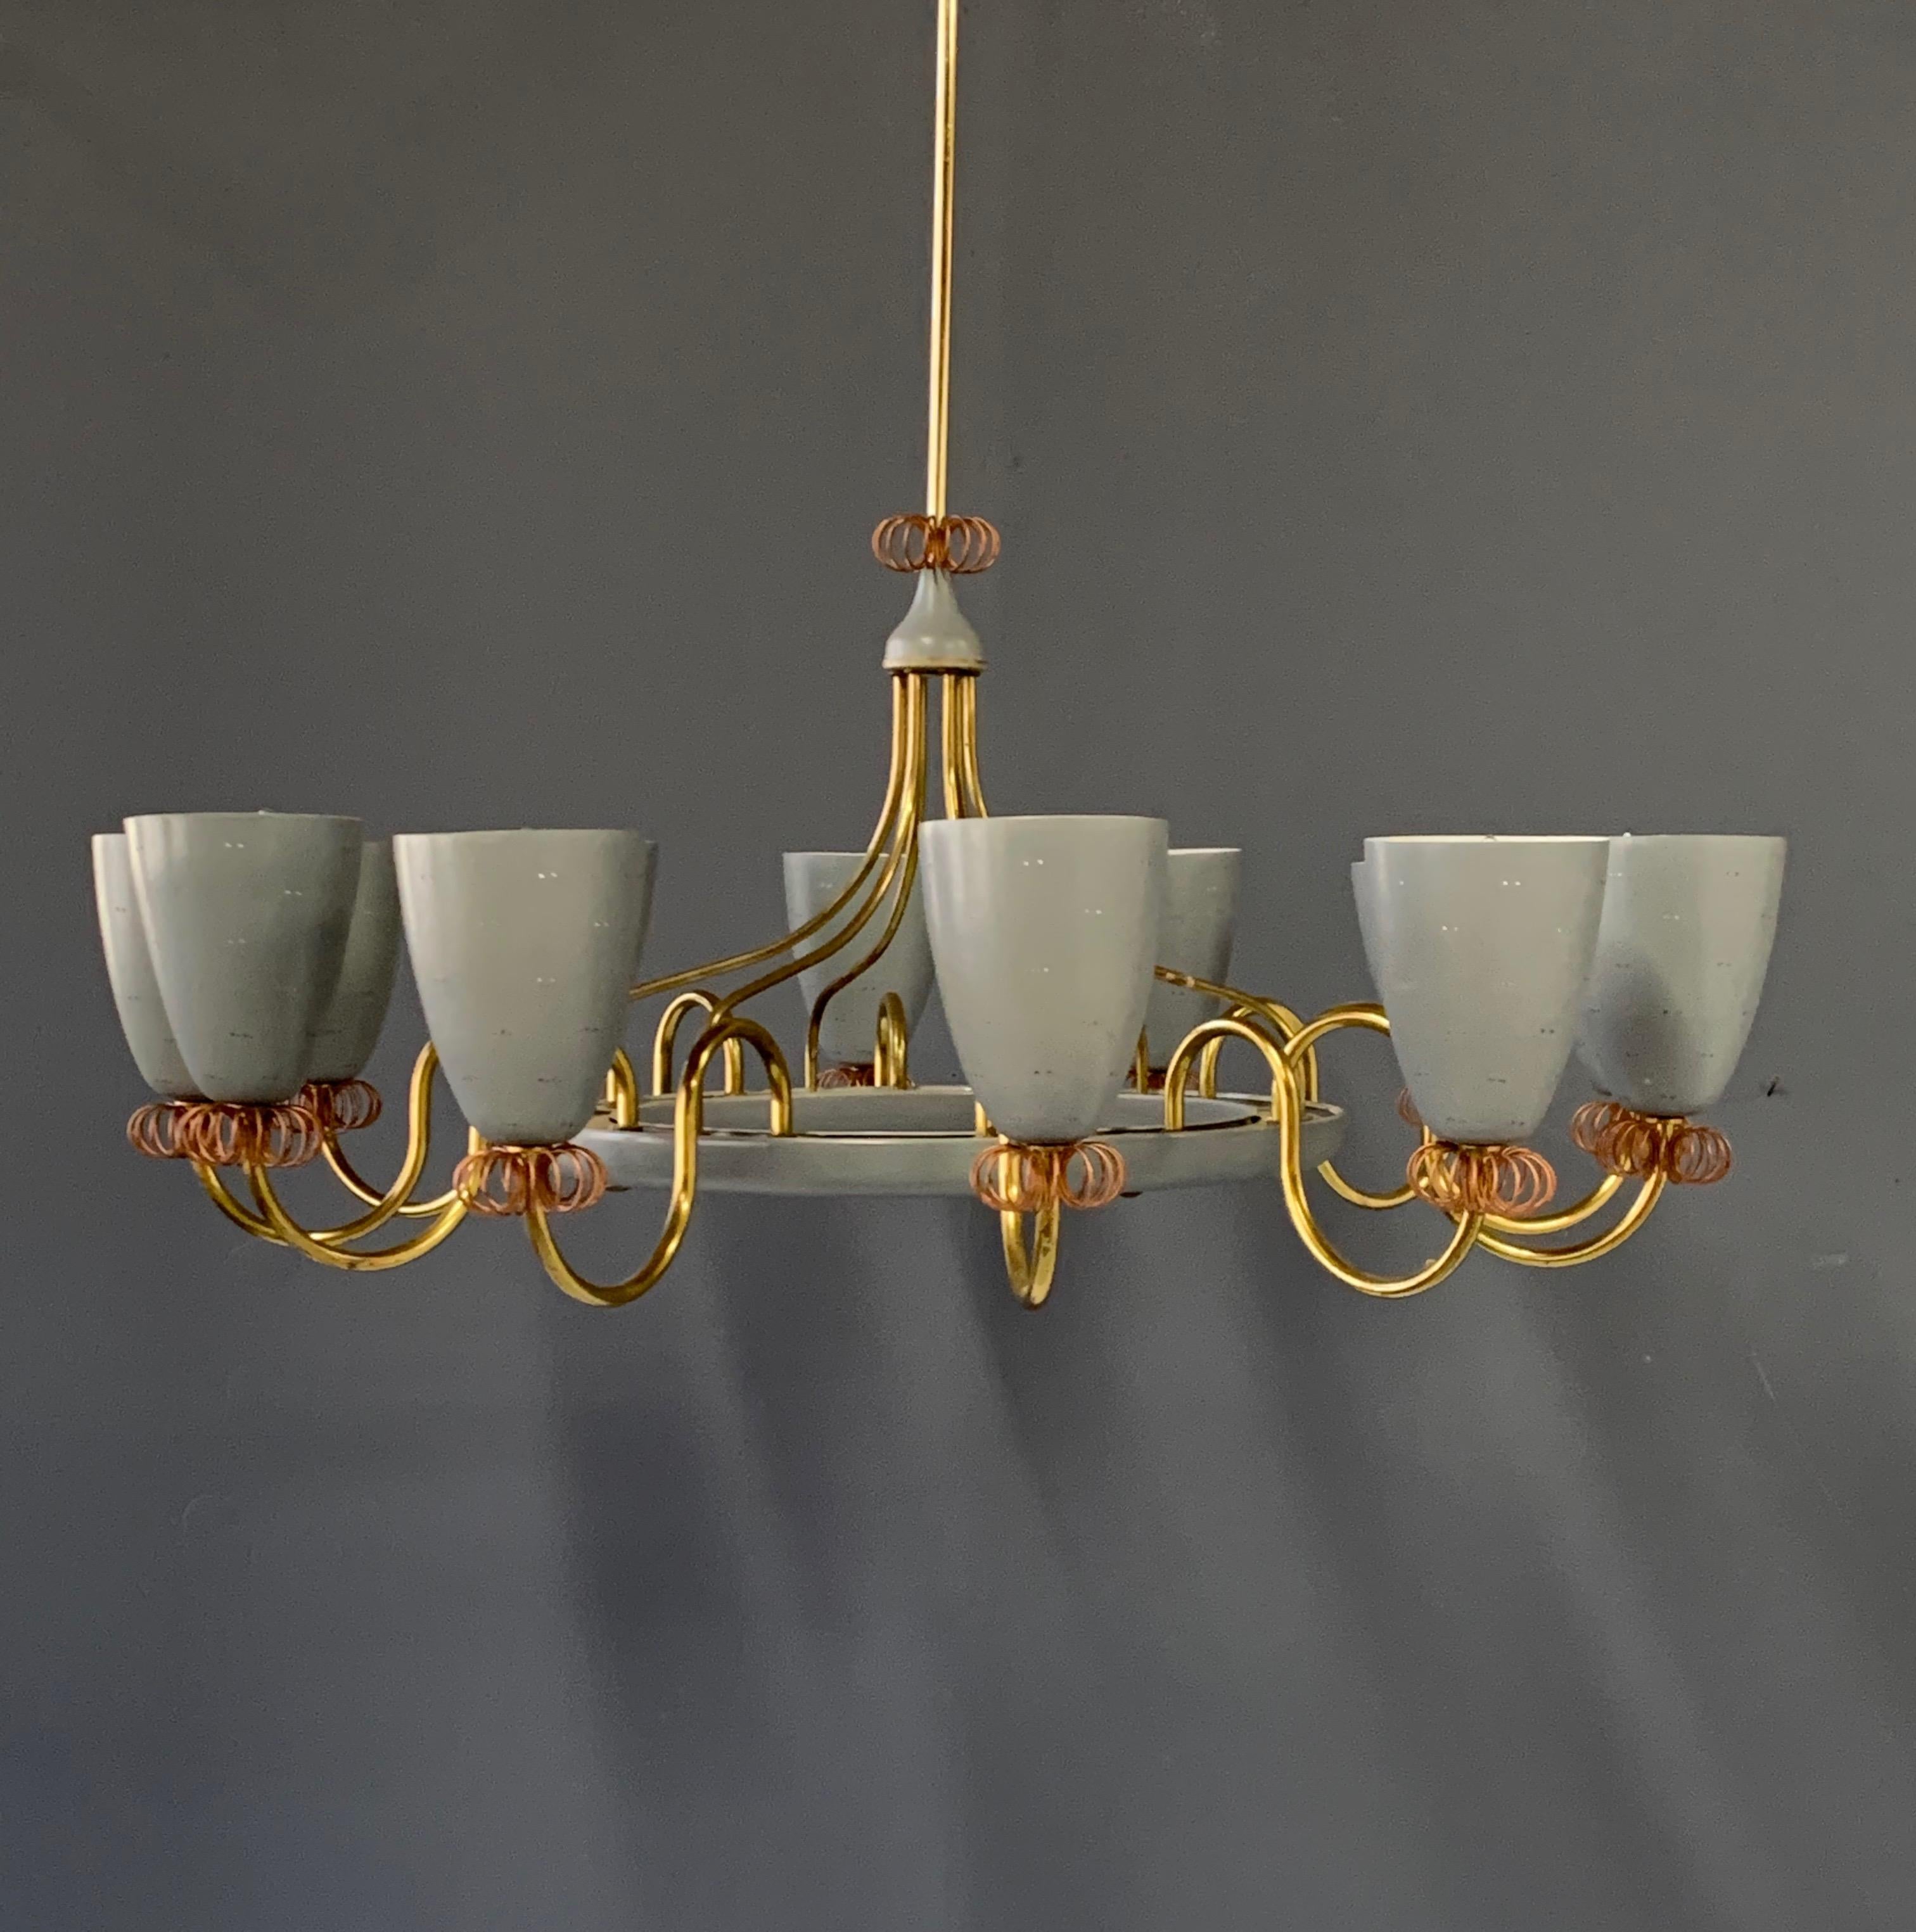 Ballerina chandelier with 12 shades by Paavo Tynell for Lightolier. 1960s brass, twelve lights on brass with copper wire decorative pieces. Shades in original grey matte enamel and perforated metal.